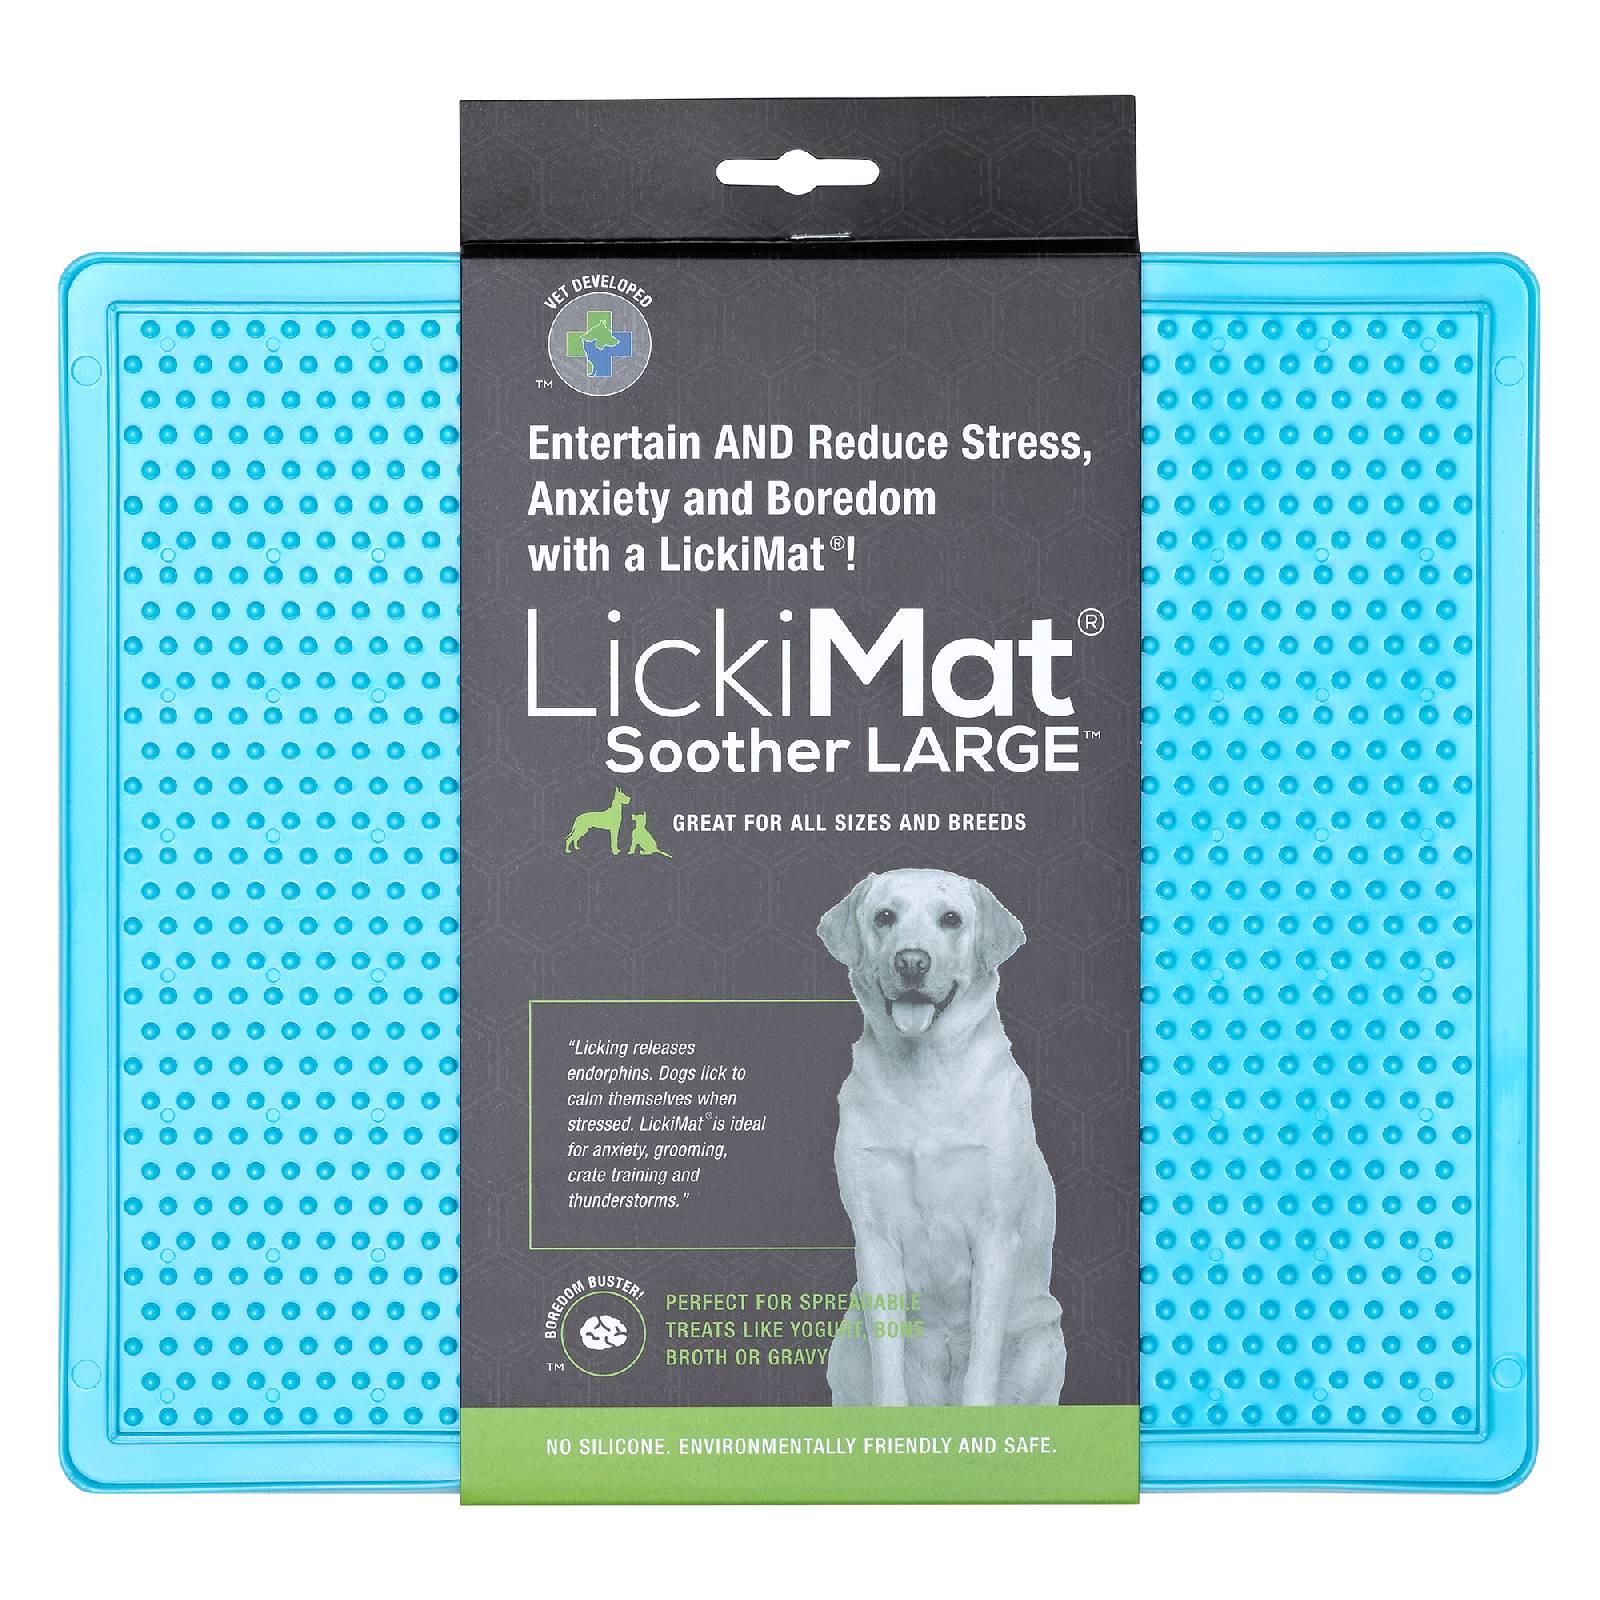 LICKIMAT - Soother Extra Large